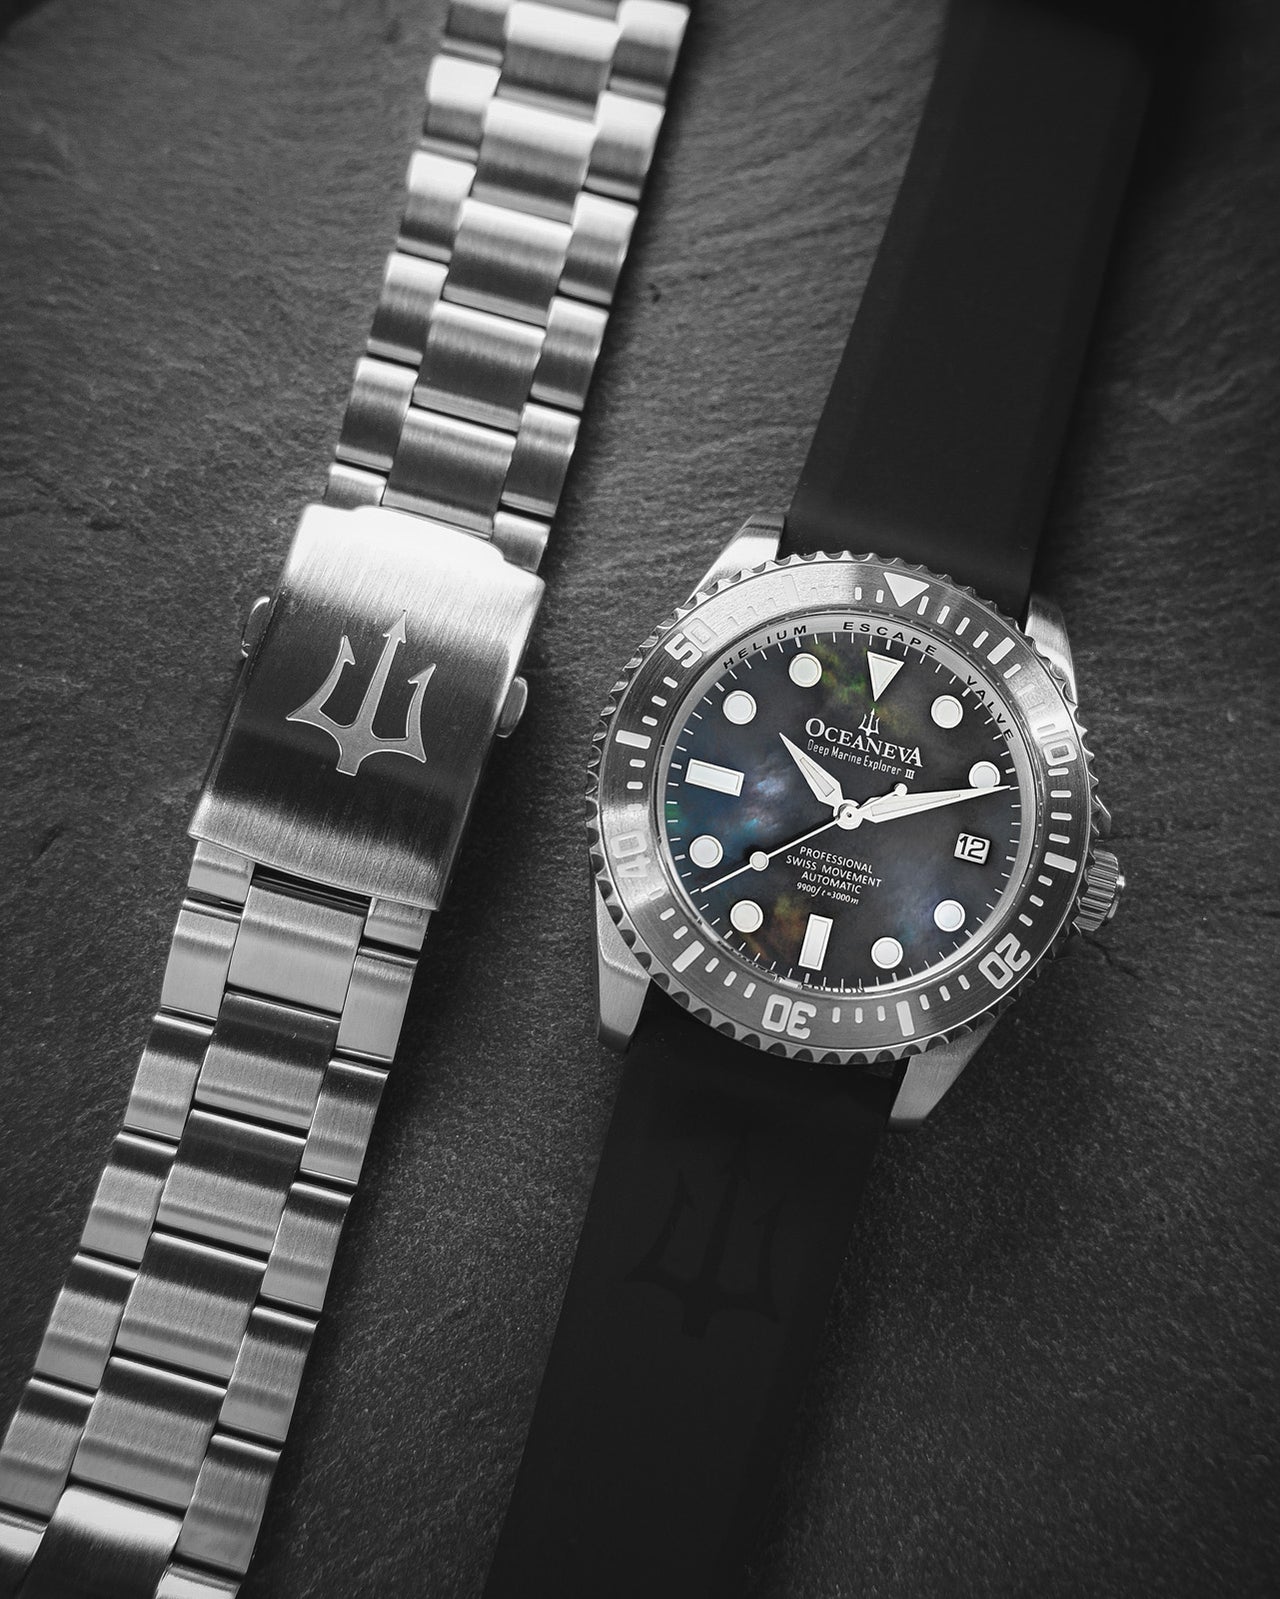 Oceaneva 3000M Dive Watch Gun Metal Gray Mother of Pearl Stainless Front Pictured With Rubber Strap